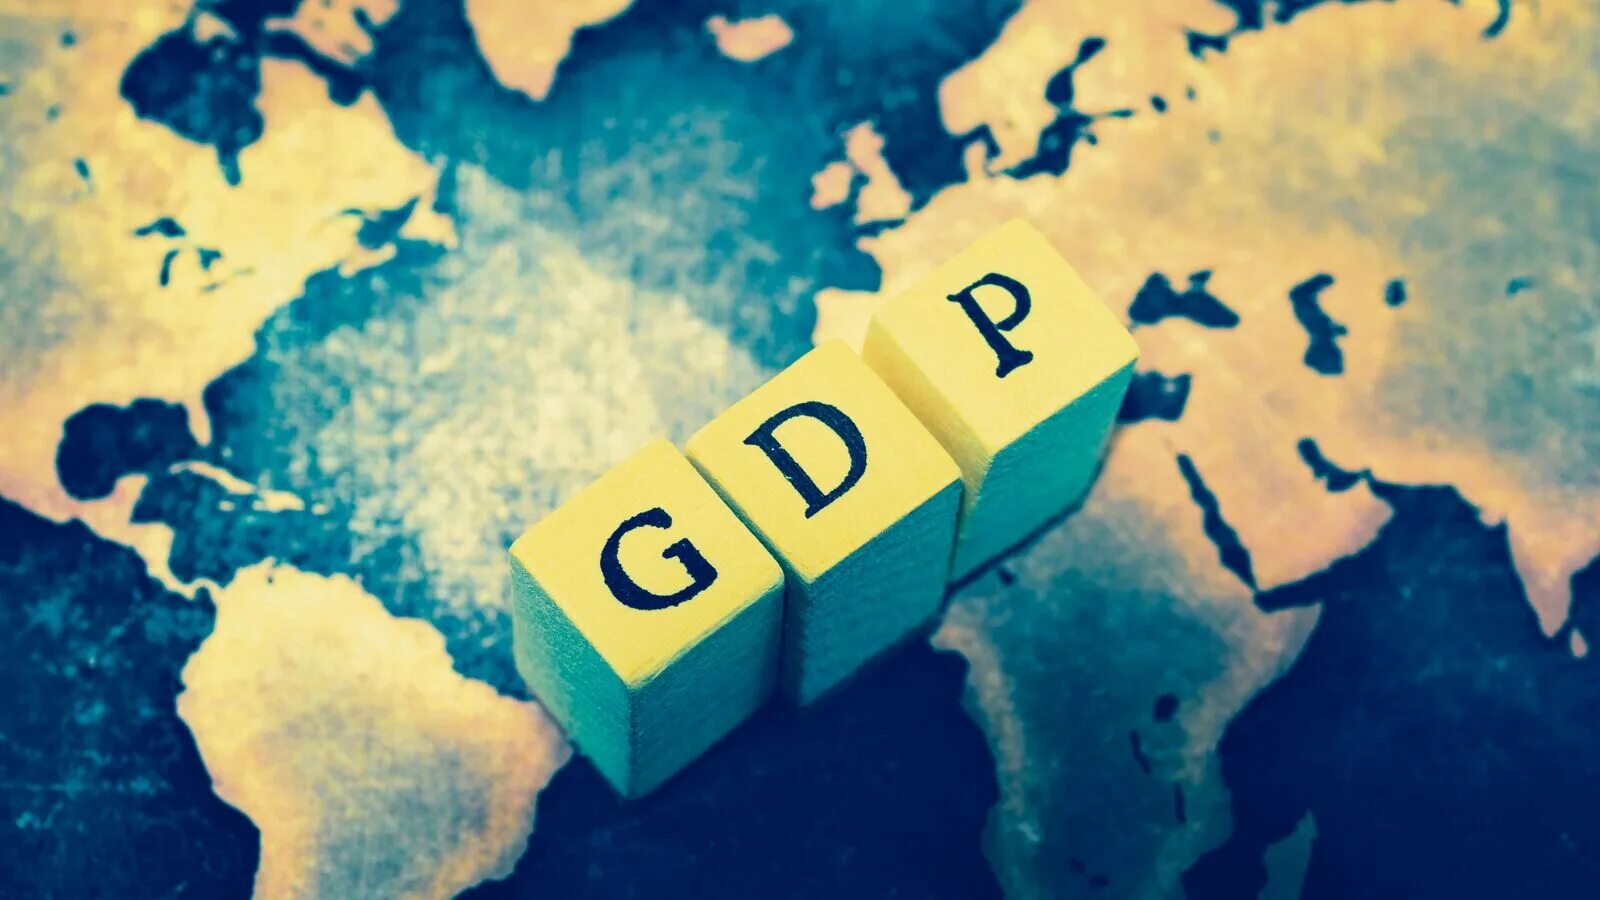 Gross domestic product. GDP. ВВП GDP. Gross domestic product (GDP).